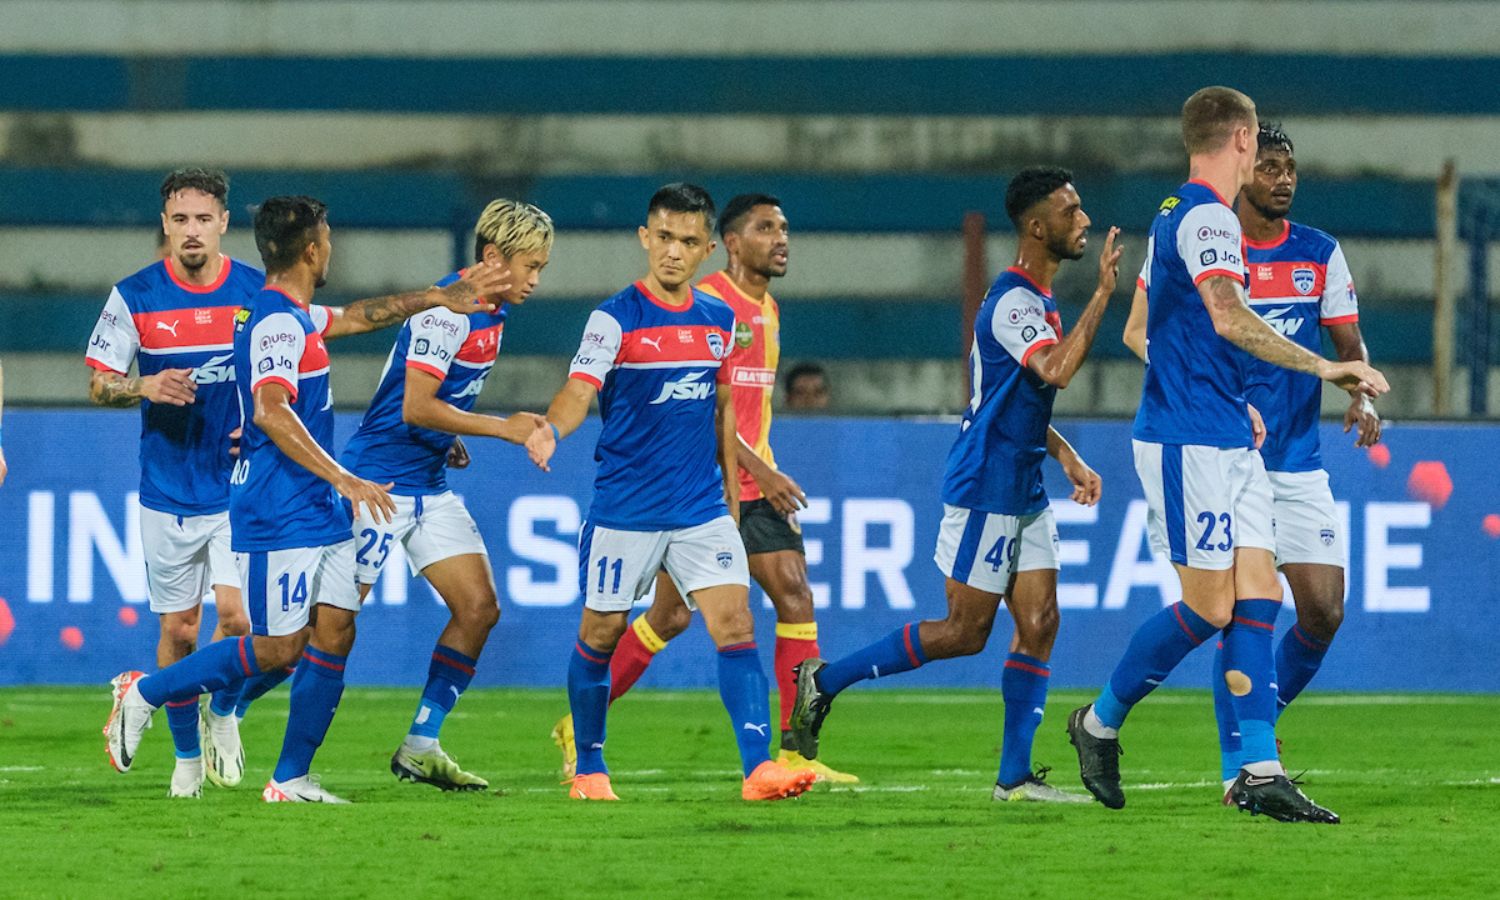 ISL: Falling off cliff - the worst-ever season for former champions Bengaluru FC